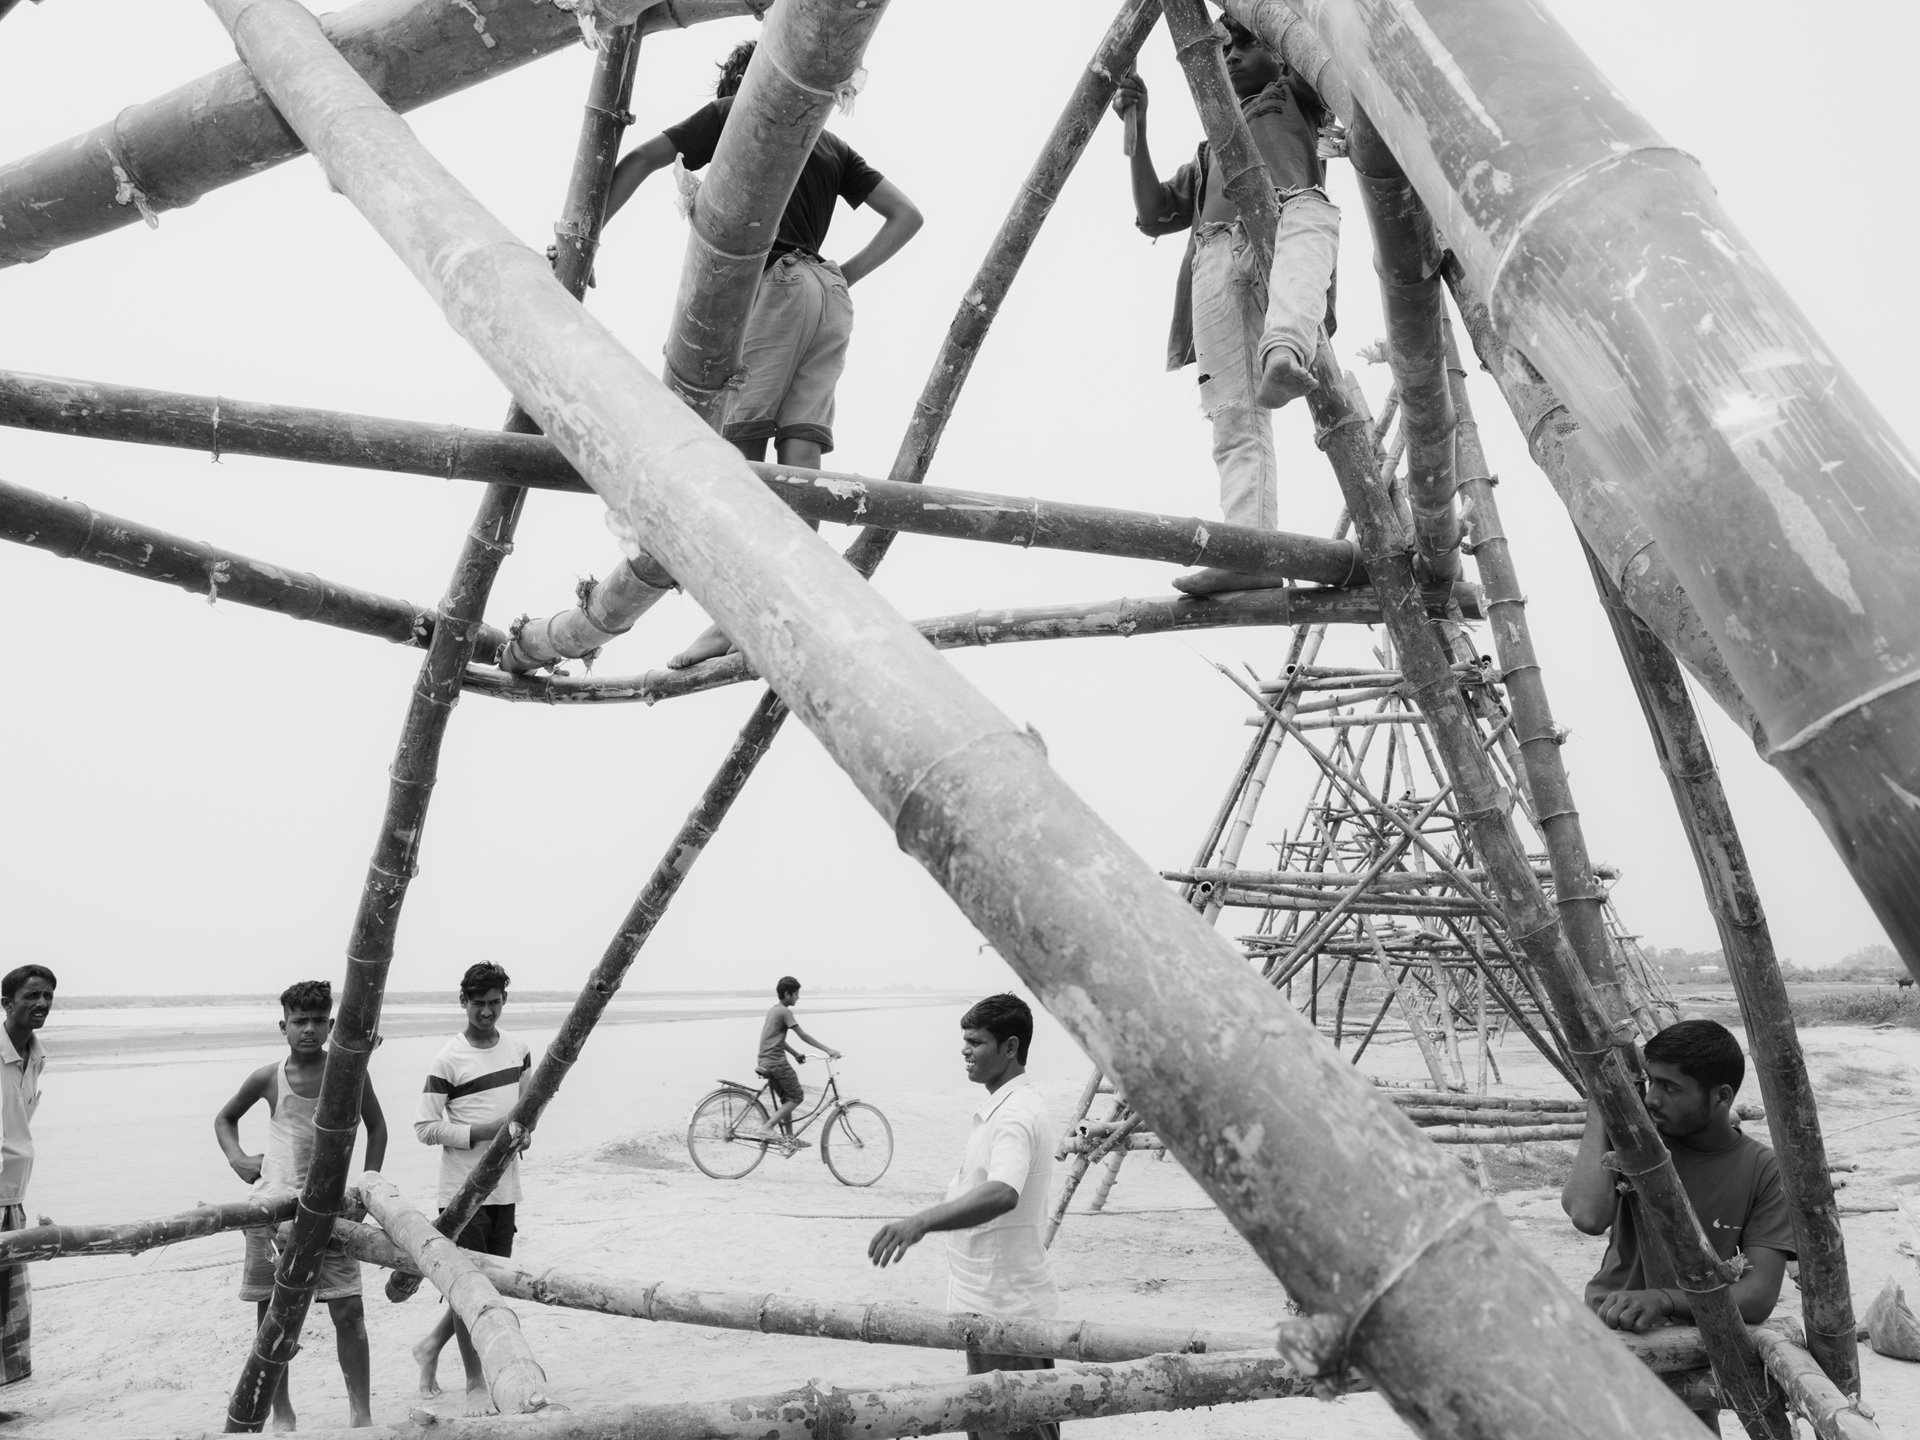 Village volunteers construct bamboo pods or &quot;porcupines&quot; to combat erosion. Indigenous communities rely on traditional methods to mitigate the Brahmaputra&#39;s aggressive erosion. These pods, placed on char edges before monsoon, entangle river vegetation, slowing the flow of the Brahmaputra and reducing soil damage. While the government has attempted concrete versions of these pods since 1980, they proved ineffective, prompting communities to revert to time-tested methods honed over centuries of enduring and mitigating environmental challenges. Tarabari, Bahari constituency, Barpeta district, Lower Assam, India.